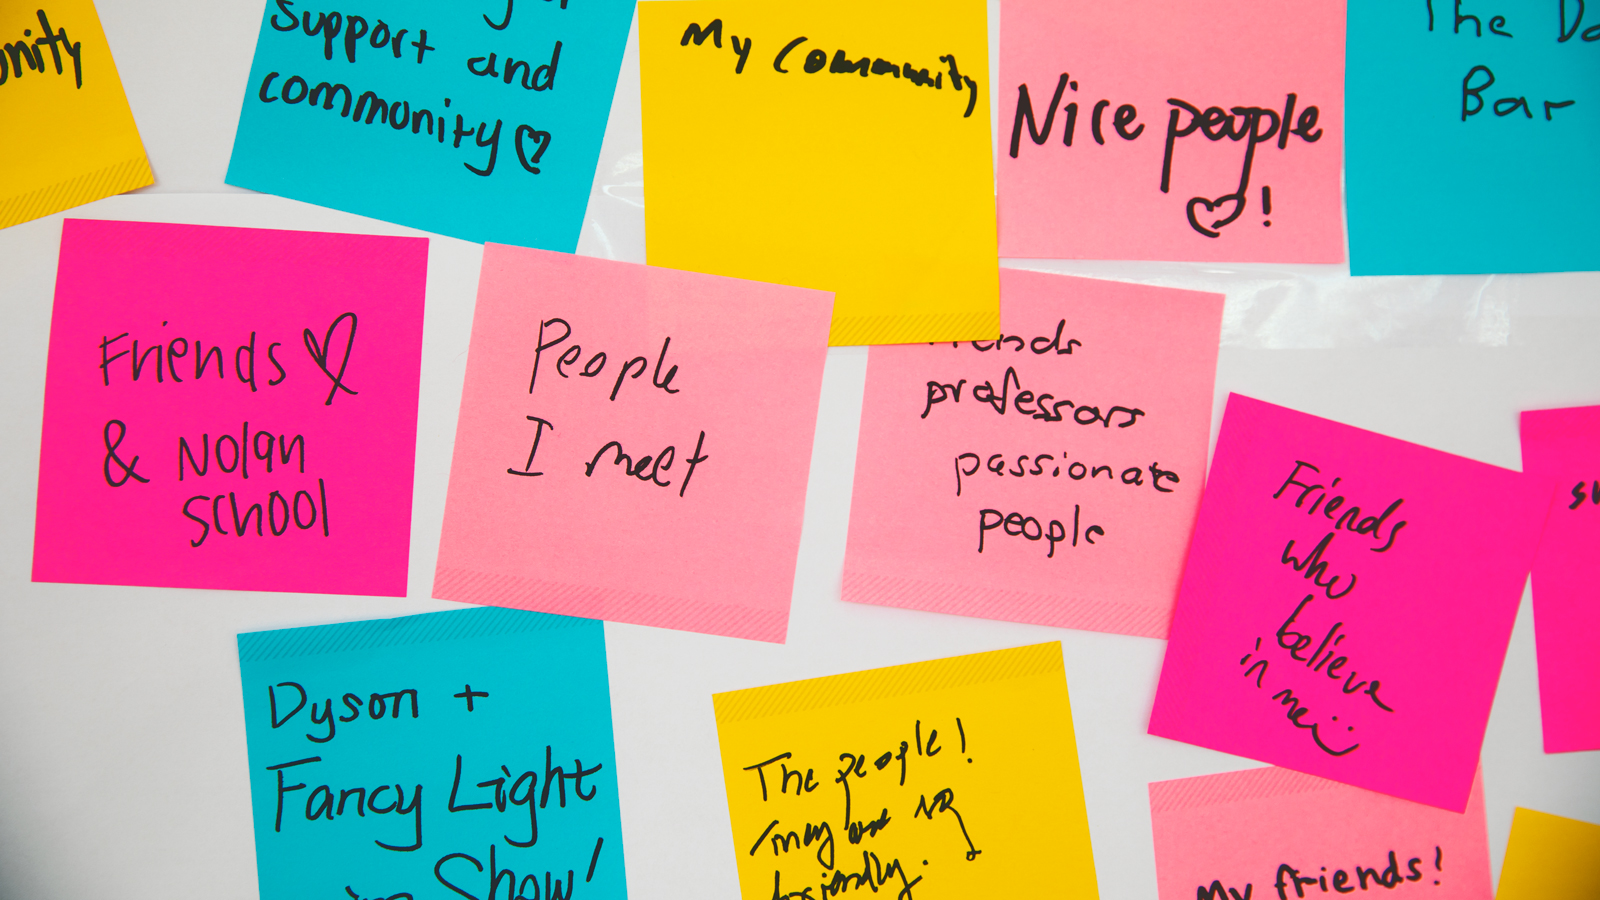 Image of multiple Post-It notes, some of which say: my community; nice people; friends & Nolan School; people I meet; friends, professors, passionate people; friends who believe in me; Dyson + fancy light show; and my friends!